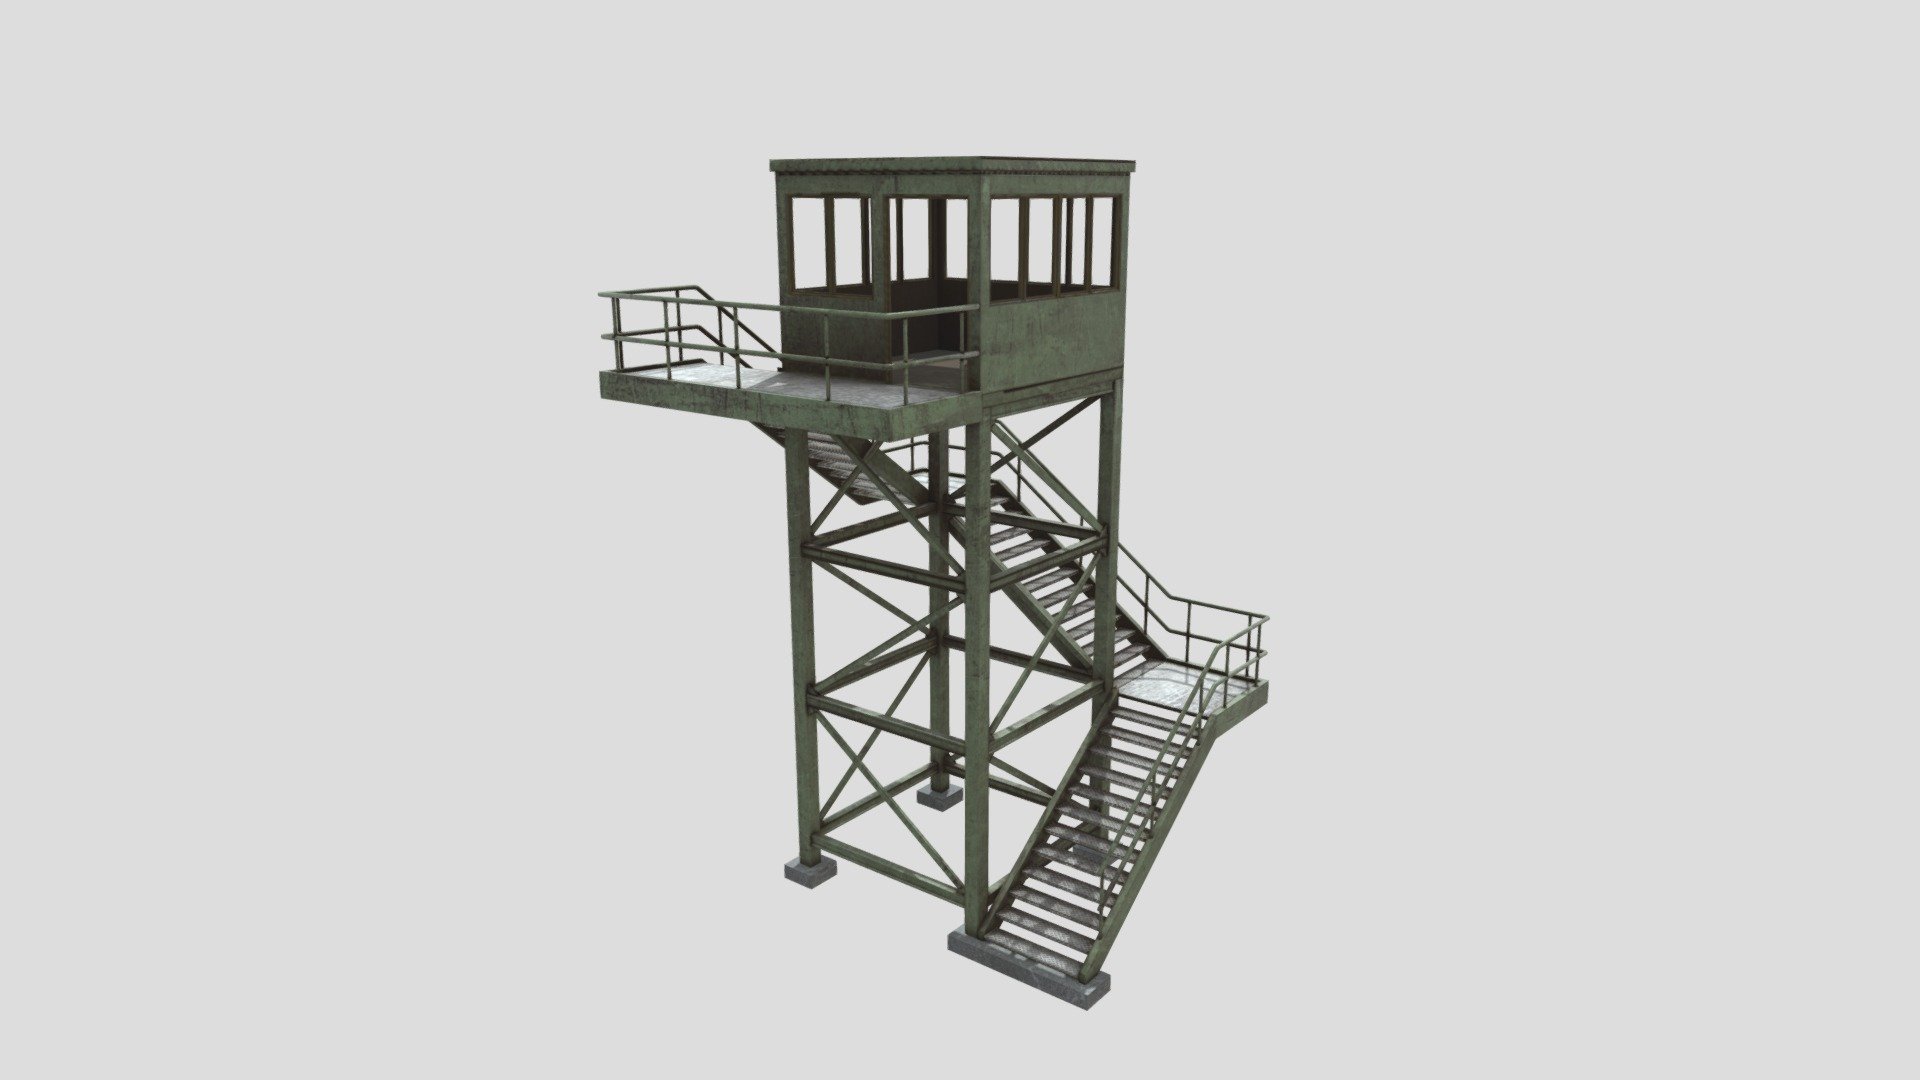 Introducing the watch tower, a meticulously crafted 3D model of a military-style watchtower, seamlessly compatible with Unreal Engine 5. This asset is a must-have for game developers and 3D artists looking to integrate an imposing and authentic military element into their gaming environments 3d model